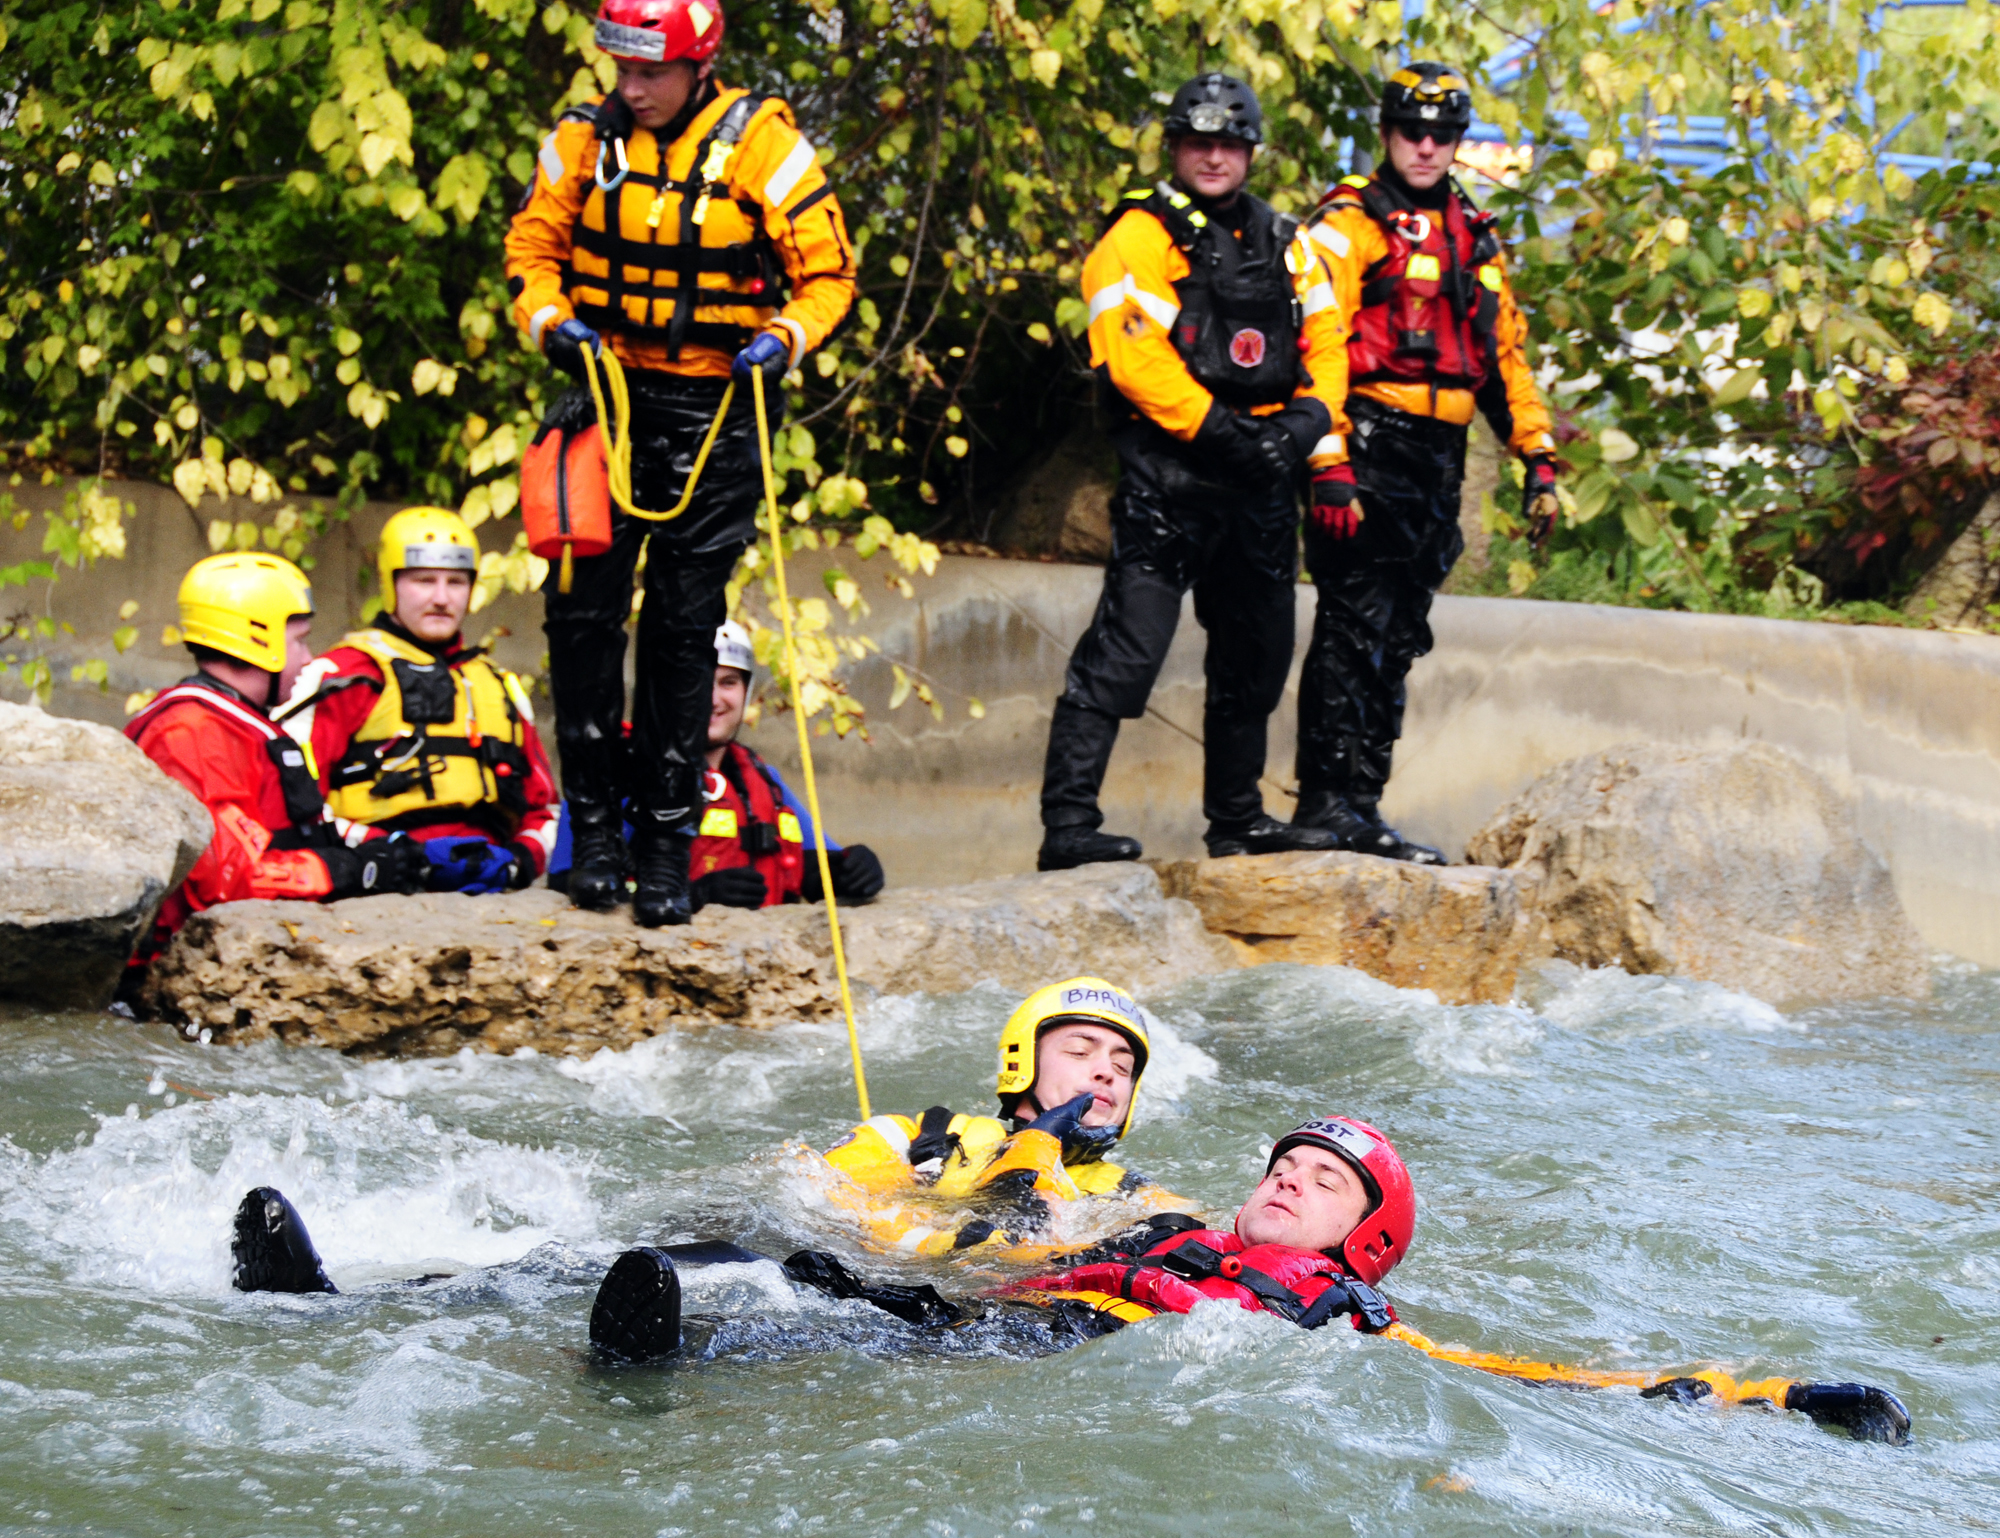 Open Rescuers learn how to handle victims adrift in a flooded waterway. Through proper use of rope they can tether themselves to rescuers on shore and retrieve a victim. 